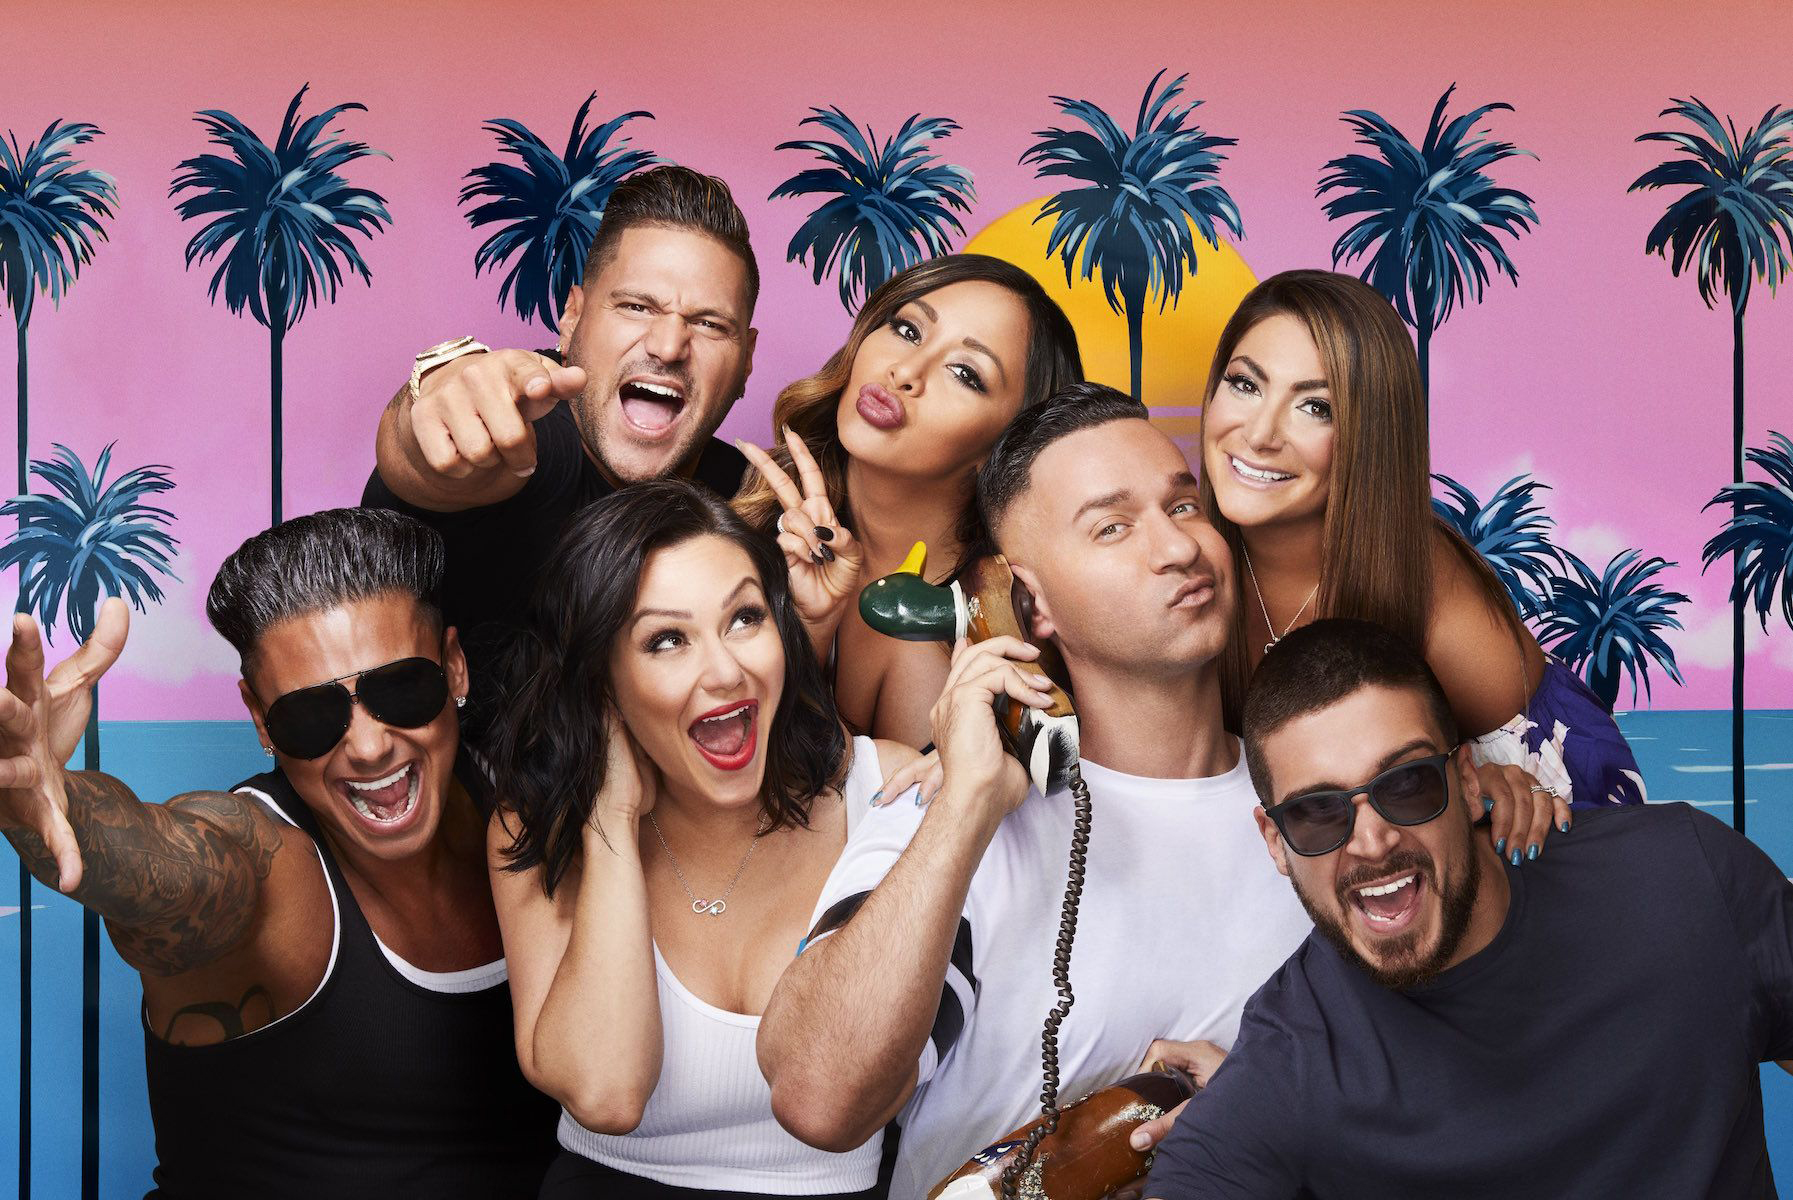 the jersey shore tv show